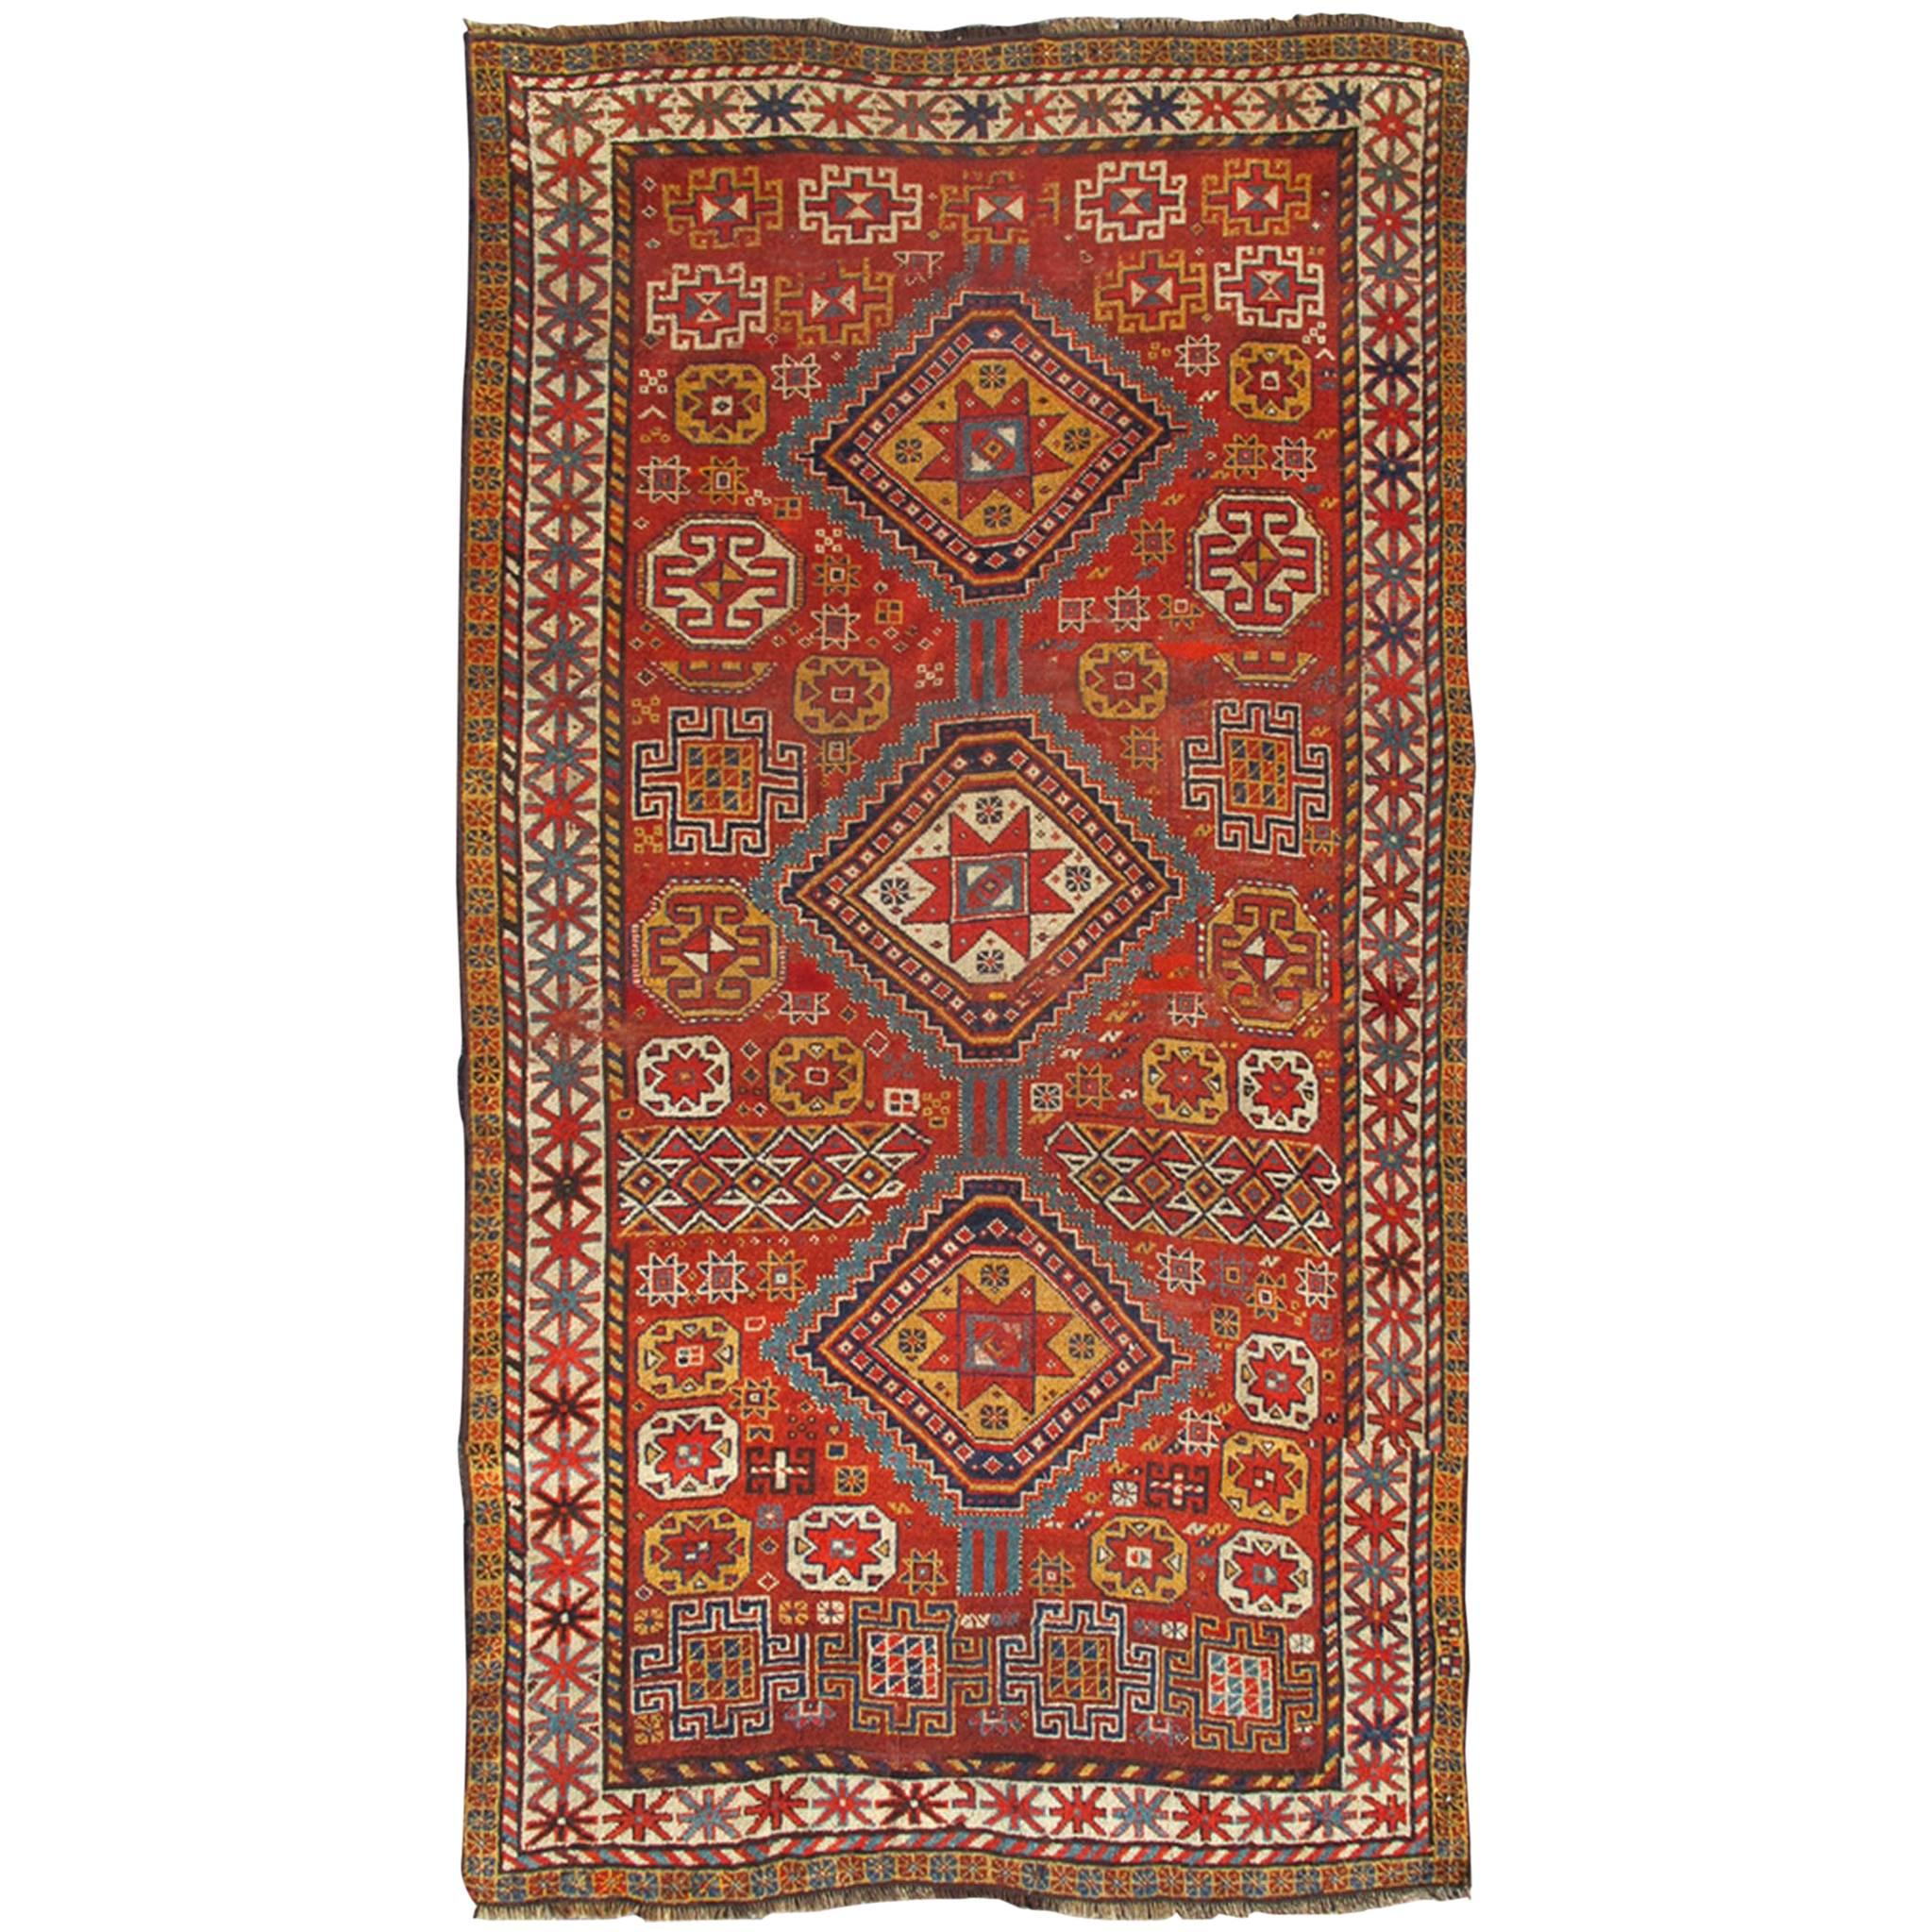 Unique Antique Qashqai Rug with Geometric Motifs in Red, Blue, and Golden Yellow